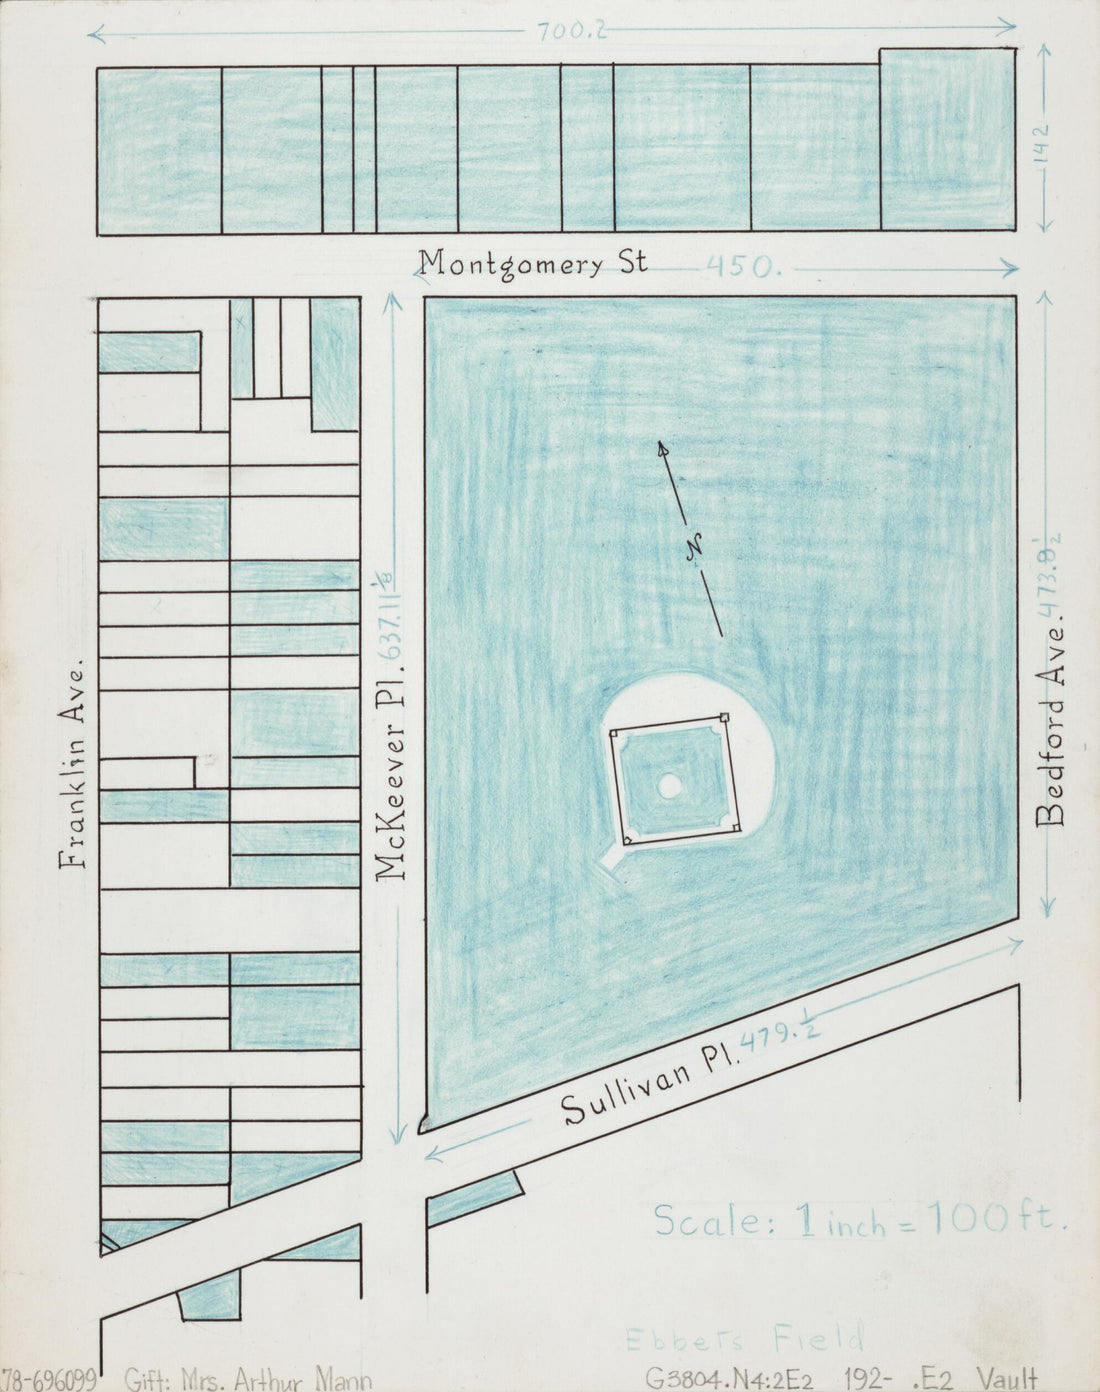 This old map of Ebbets Field from 1920 was created by Arthur Mann in 1920